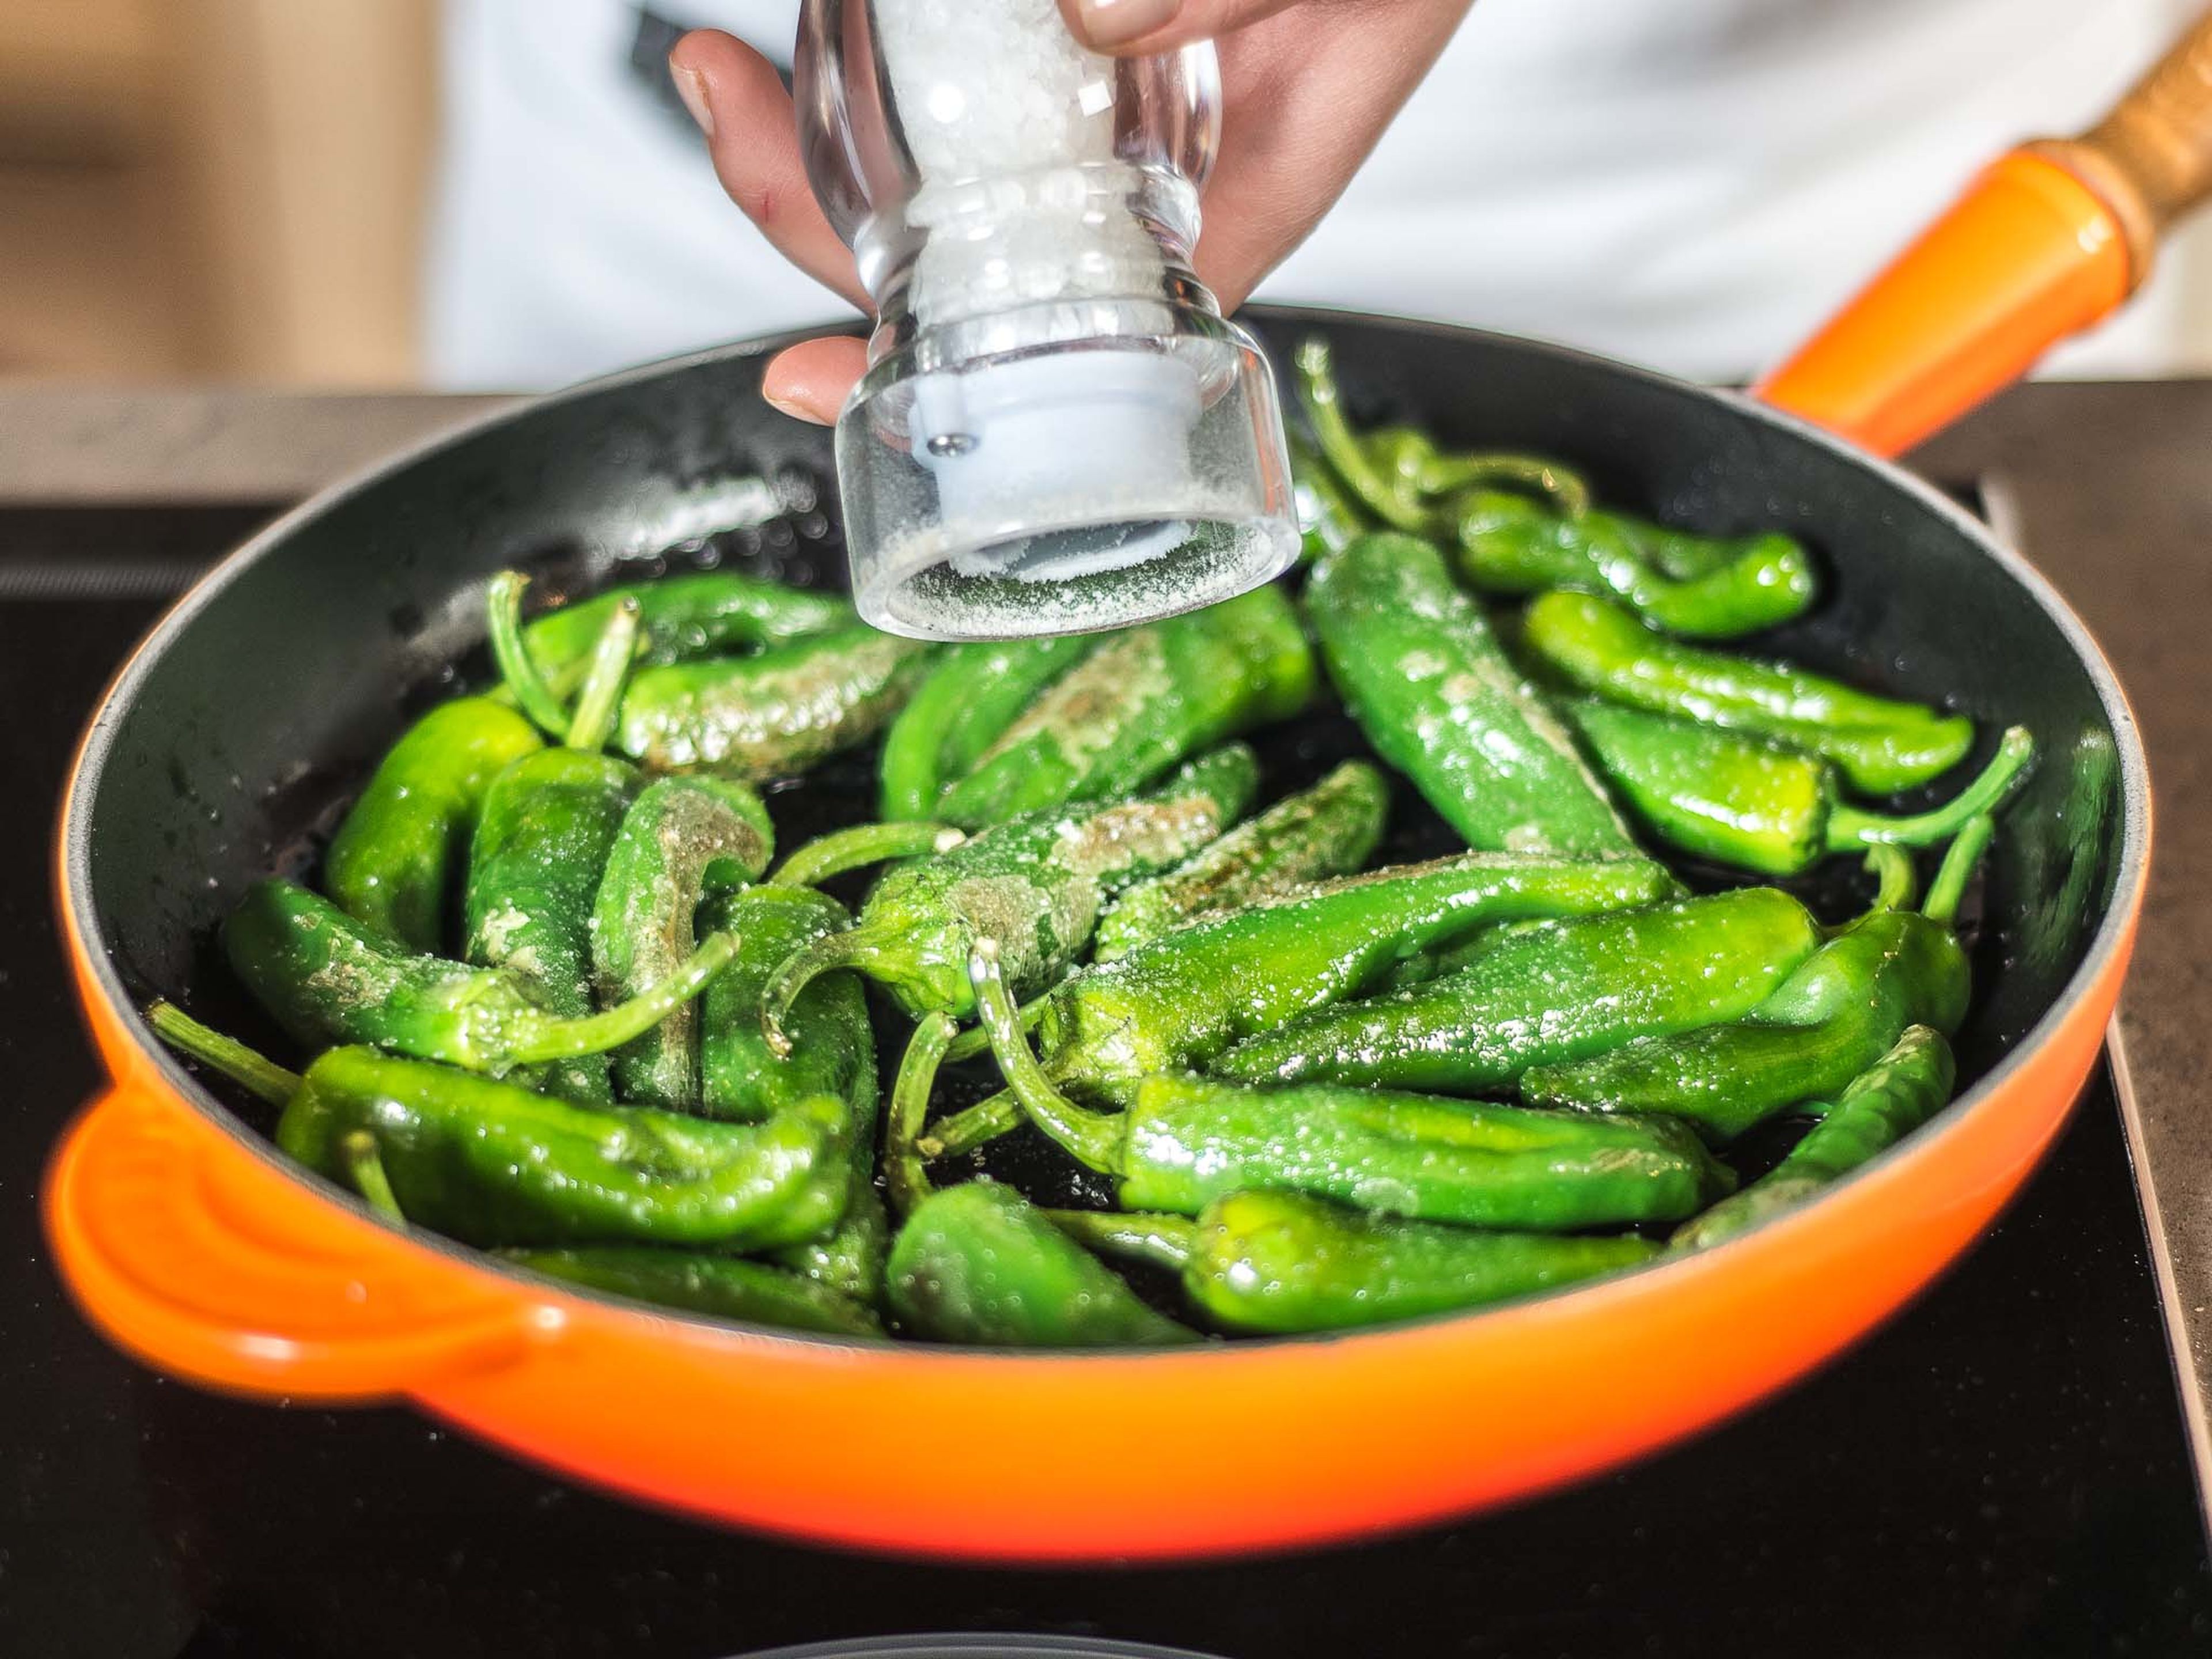 In a second pan, fry Padrón peppers in some vegetable oil and add plenty of salt. Toss the noodles in the sauce and serve in a deep dish with the fried Padrón peppers on top.